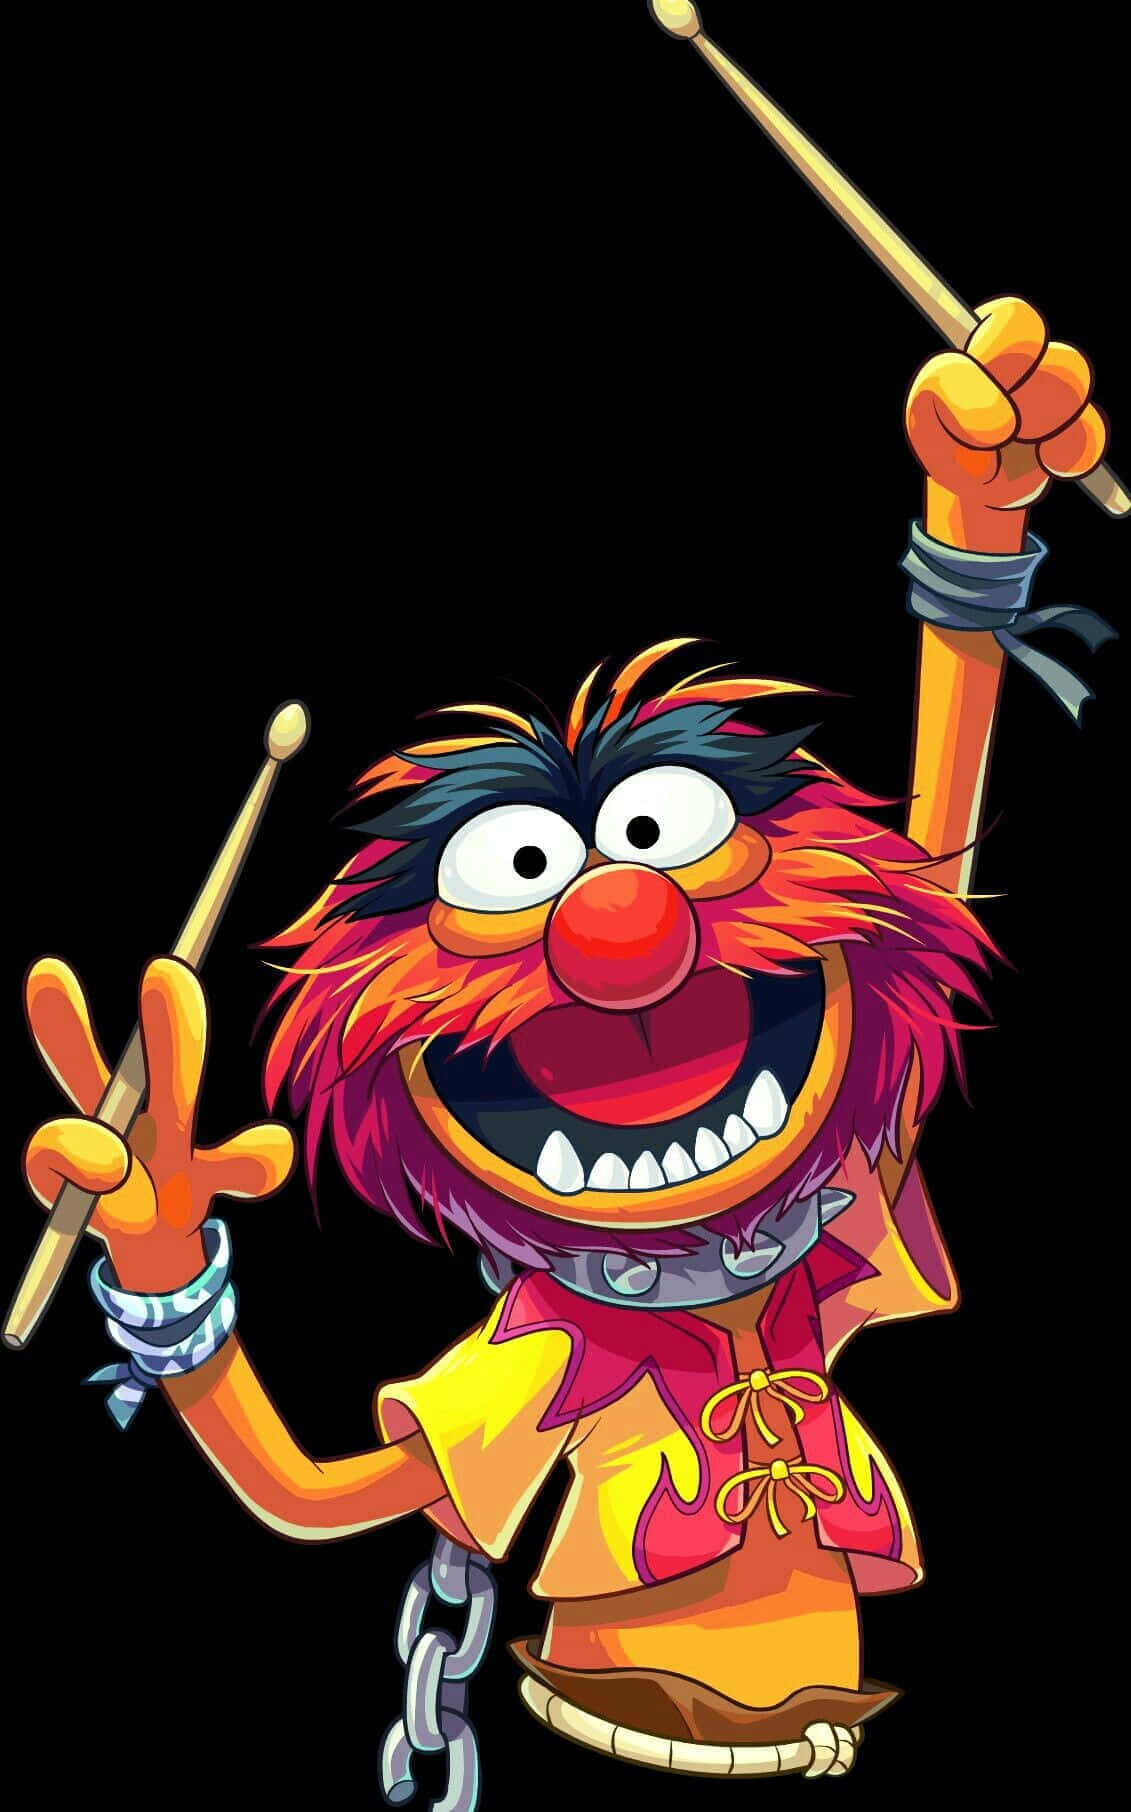 Animated Drummer Muppet Character Wallpaper